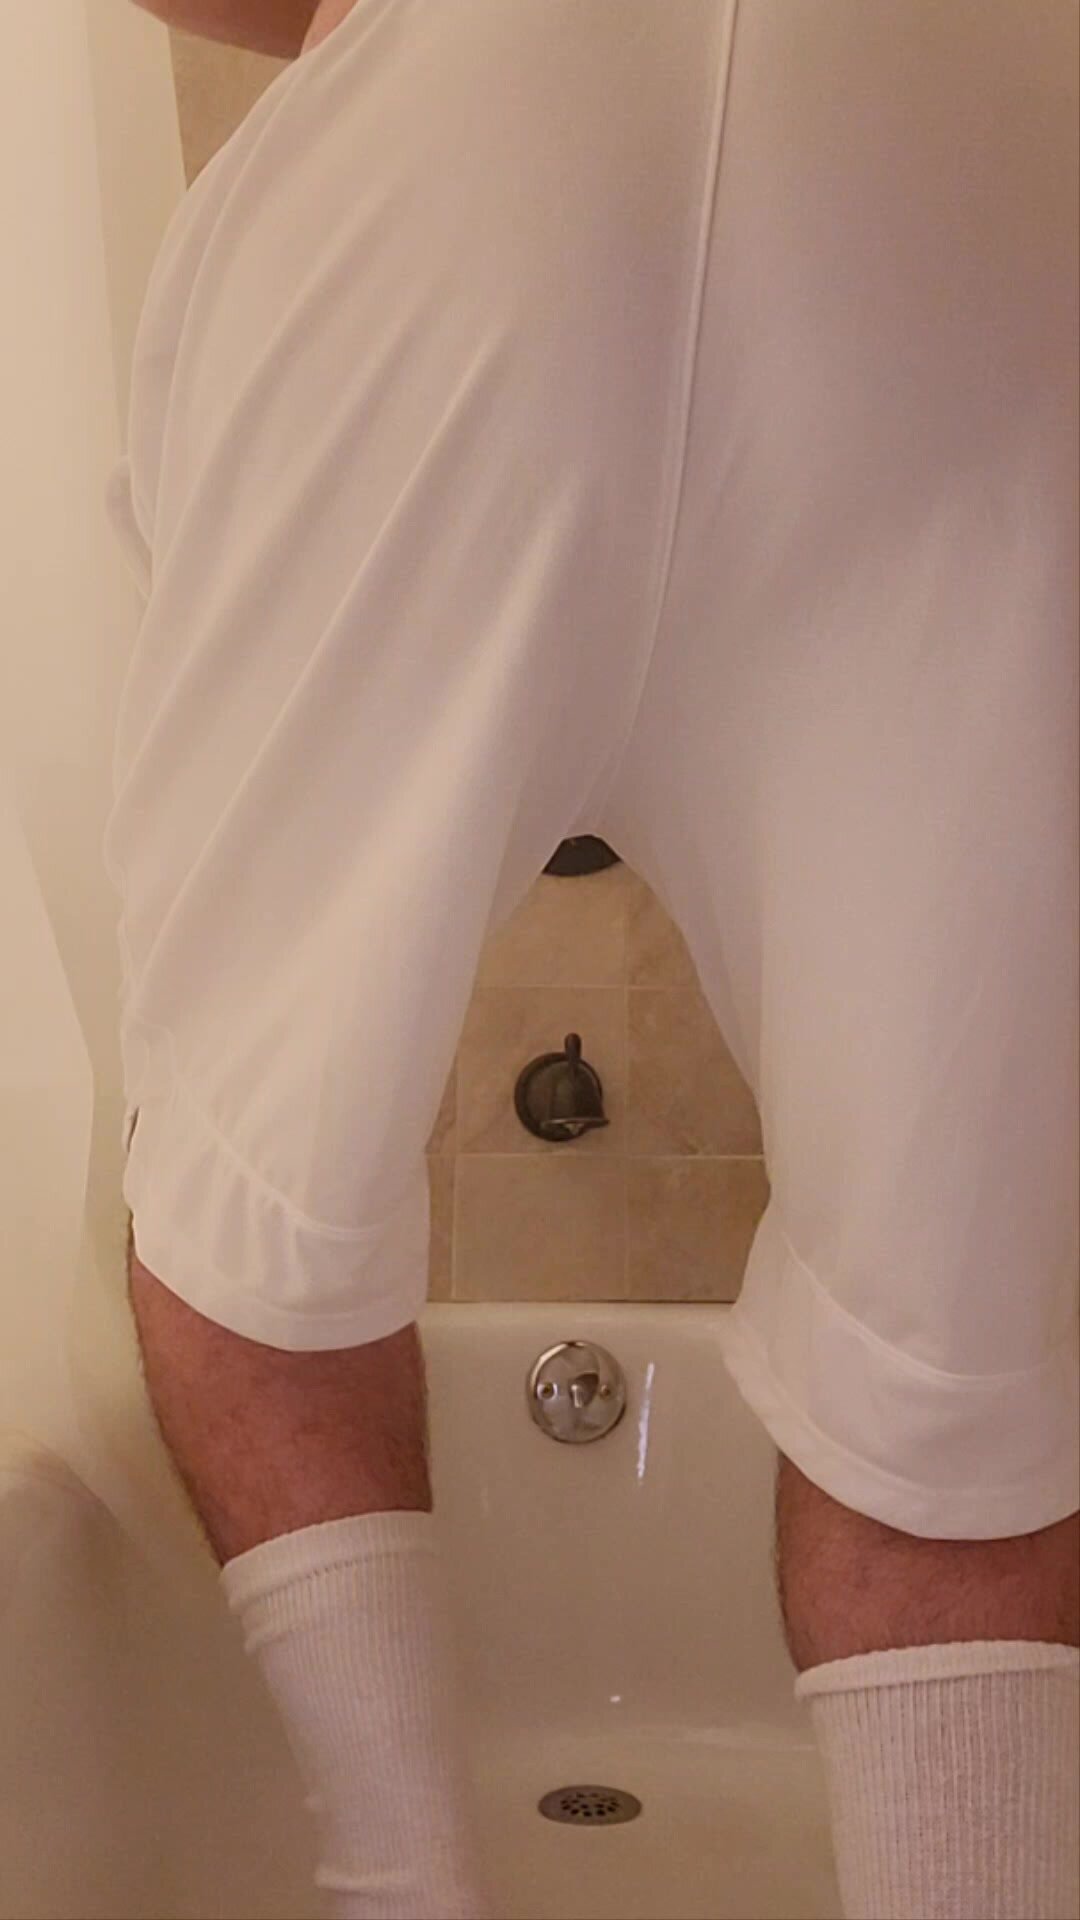 More big and smelly pre-poop farts in white shorts